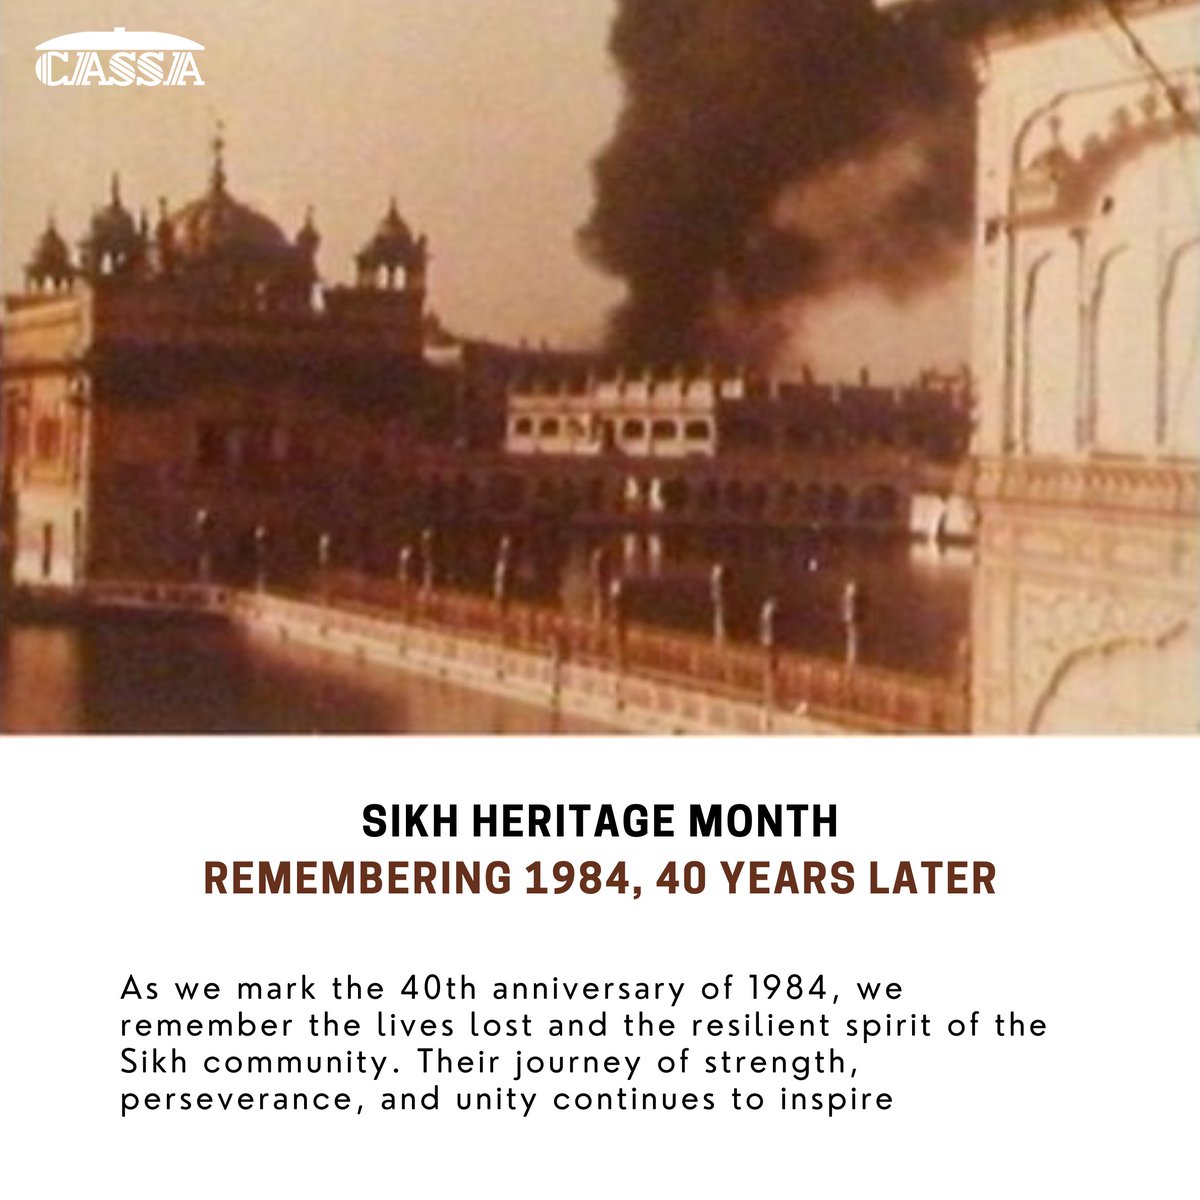 Reflecting on resilience, 40 years on. This Sikh Heritage Month, we honor the enduring spirit and unity of the Sikh community.  #NeverForget1984